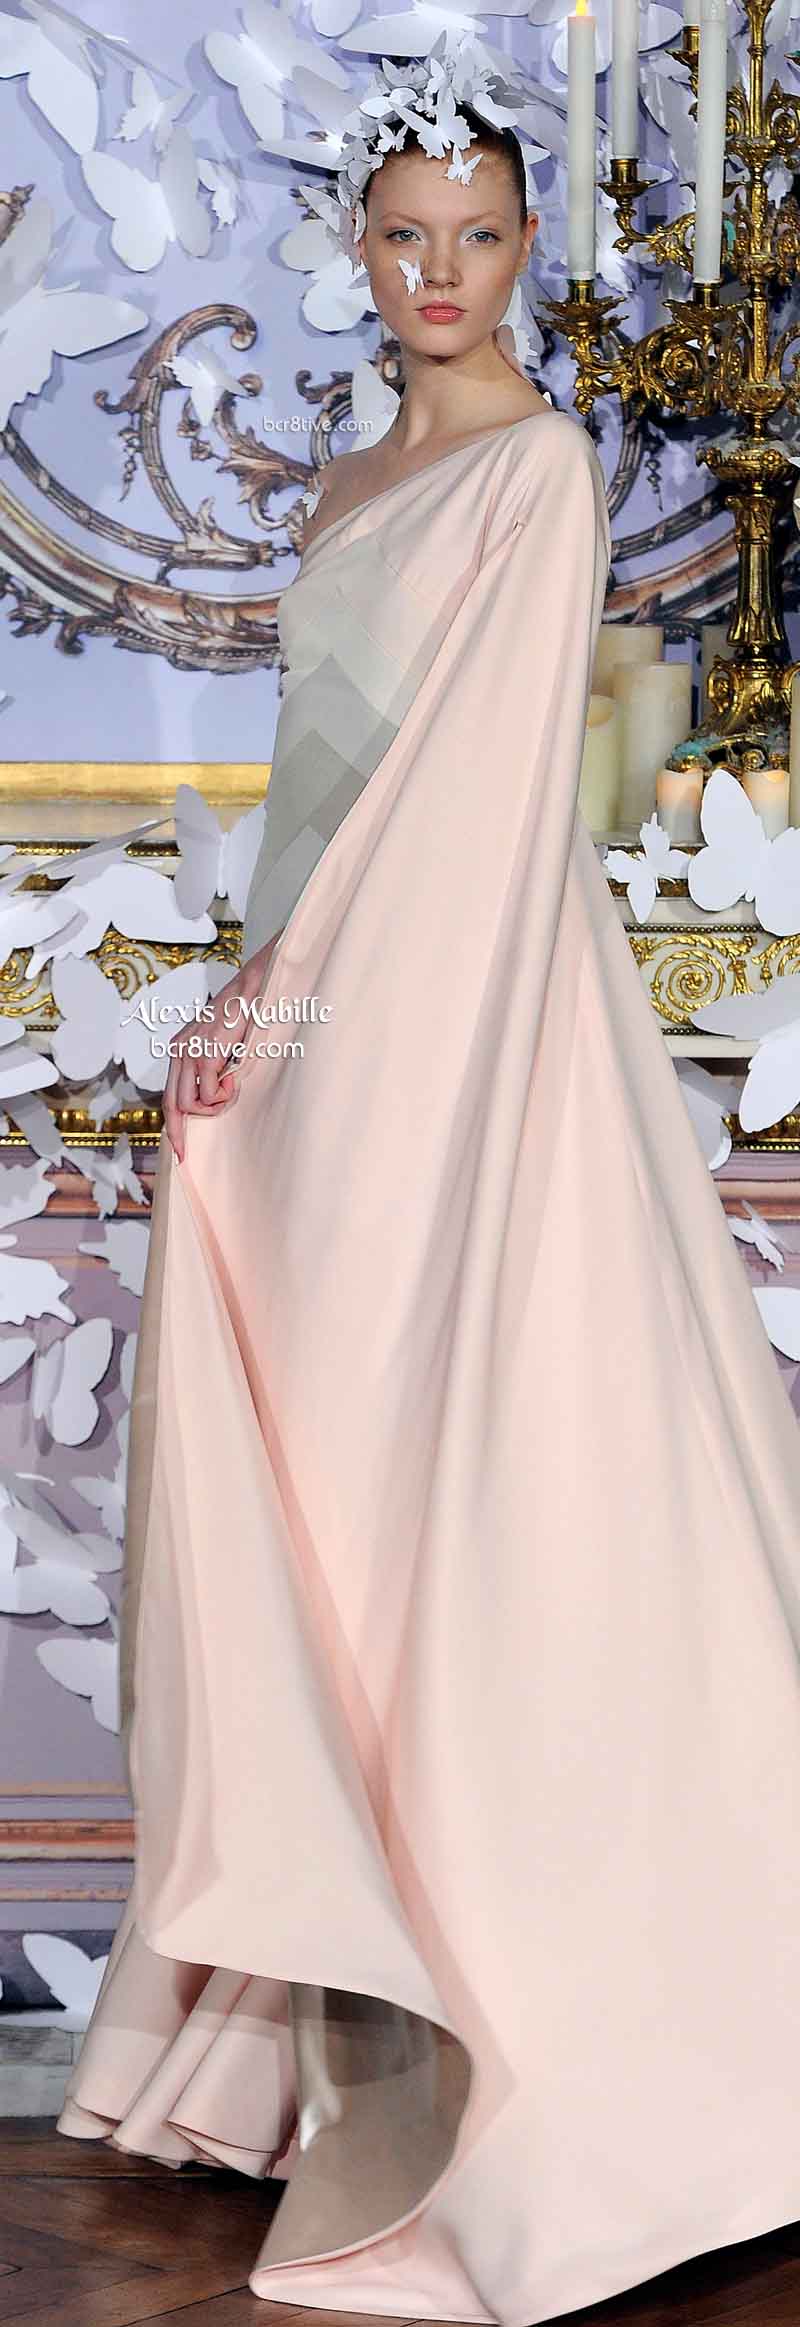 Alexis Mabille Spring 2014 Haute Couture 